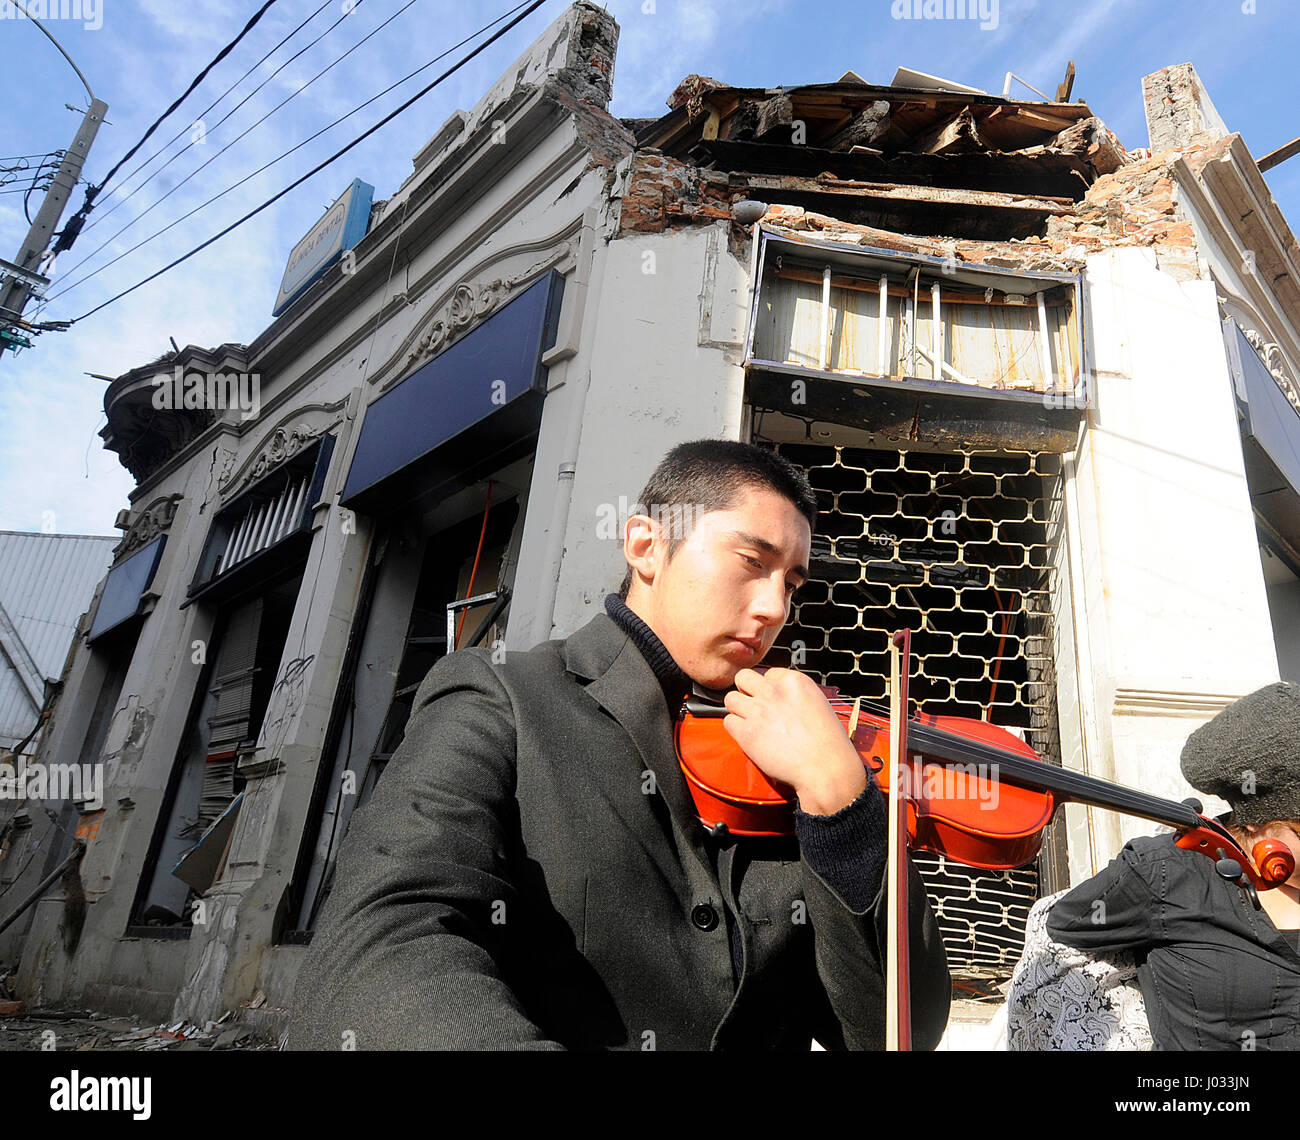 Alex Moreno plays his violin during a benefit for the Talcahuano children's orchestra in Talcahuano, Chile following the 2010 tsunami and earthquake. Stock Photo